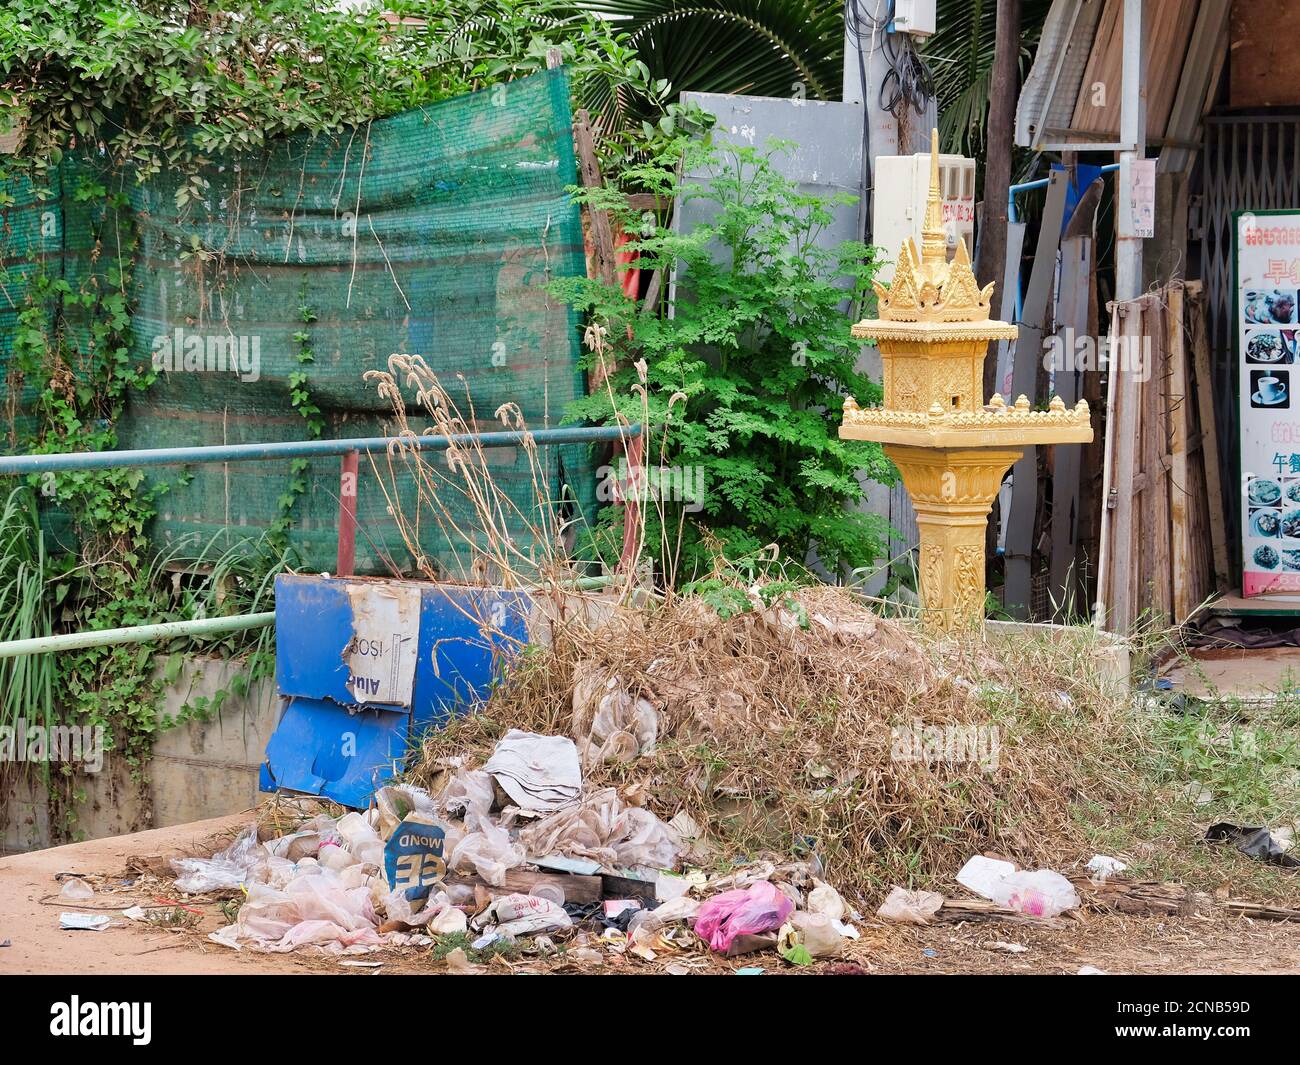 Cambodia, Siem Reap 12/08/2018 a small Buddhist sanctuary among the heaps of garbage on a city street, a garbage dump near a religious object Stock Photo